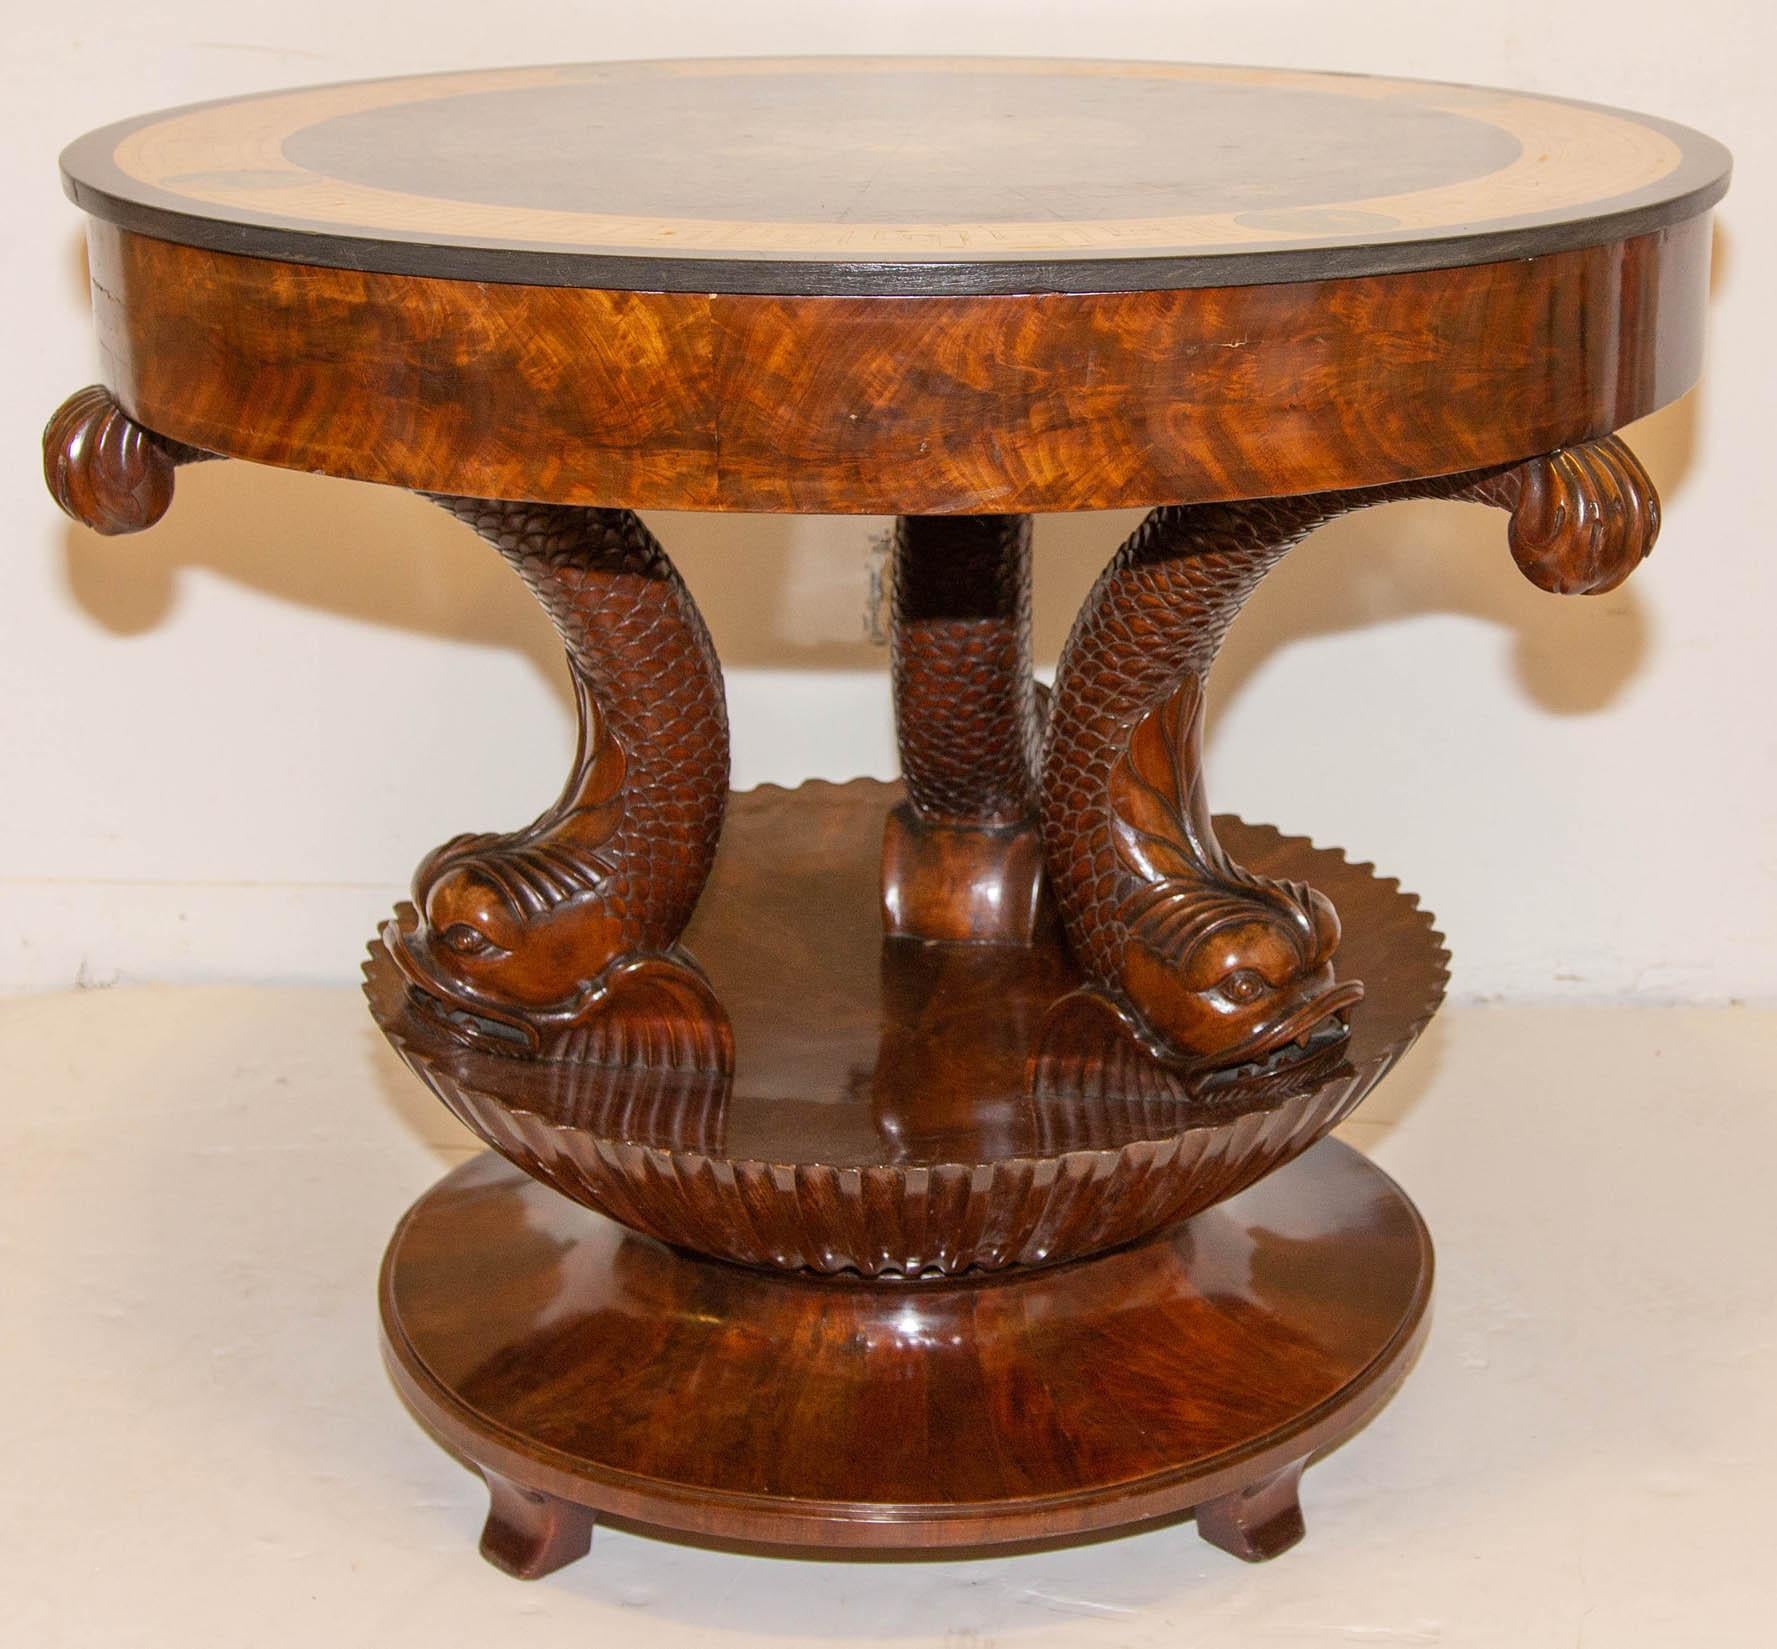 Antique Italian Neoclassical Sgagliola Table with Carved Dolphin Base Circa 1810 In Good Condition For Sale In Rochester, NY